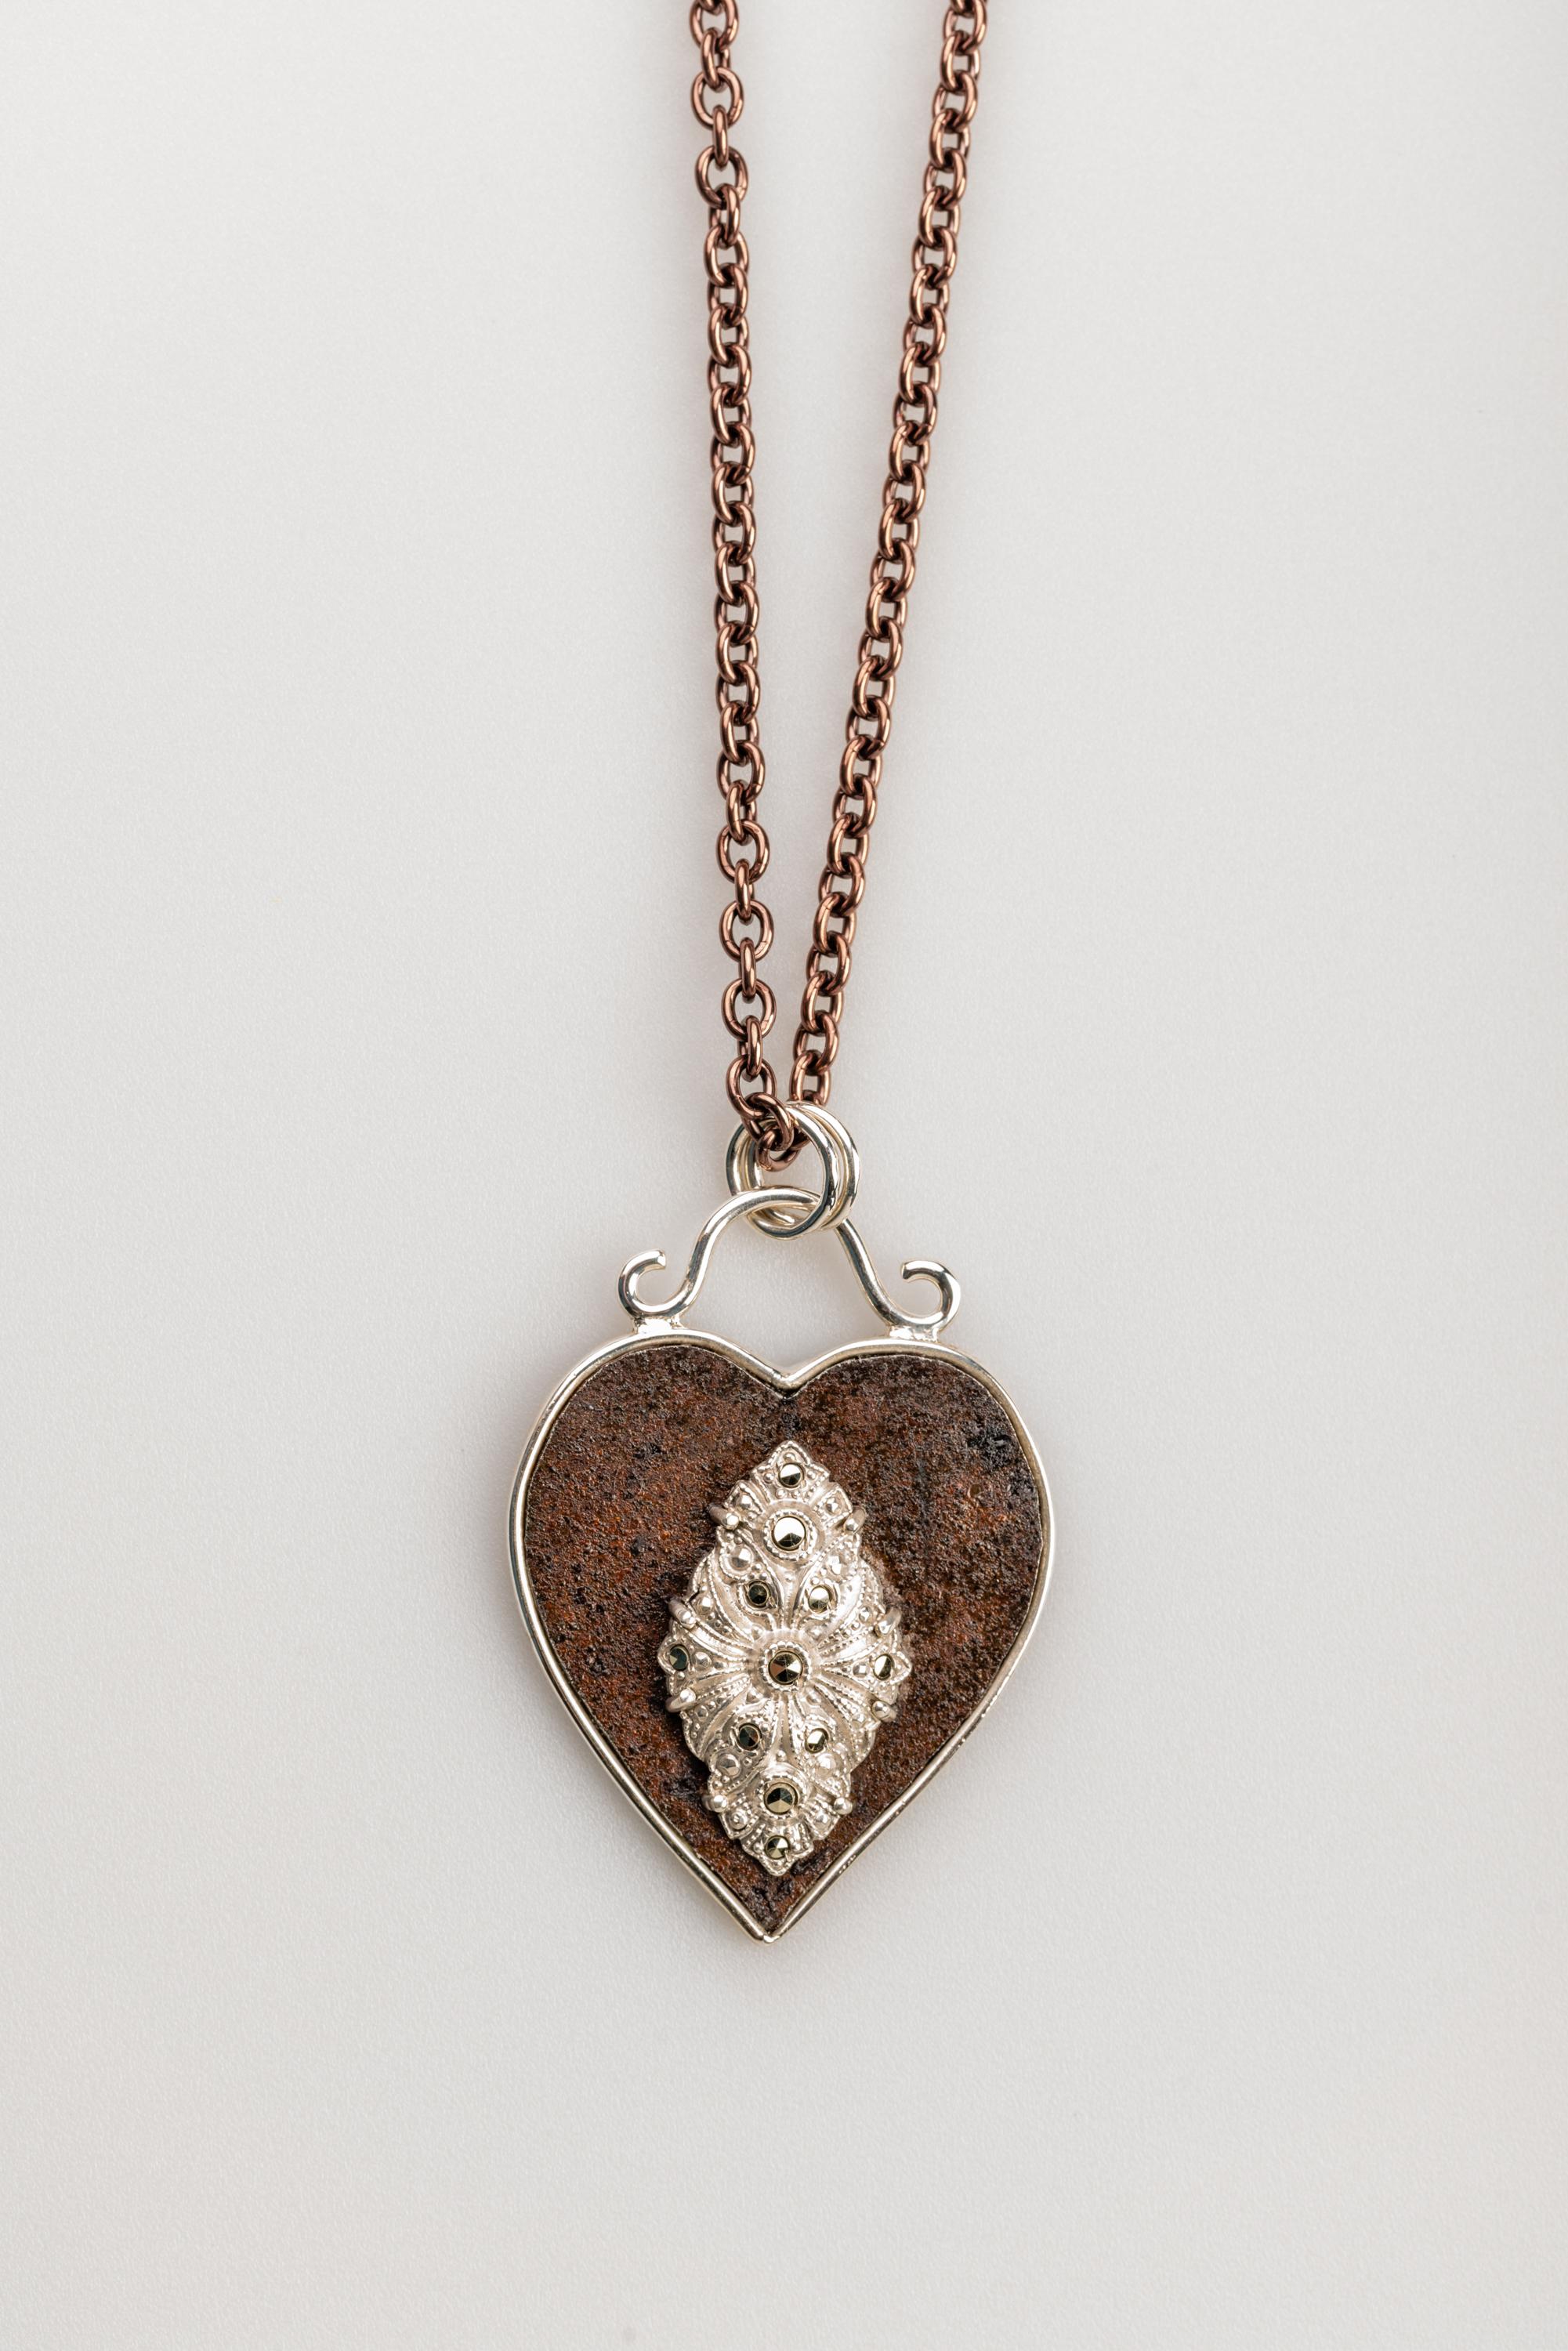 A 2020 Unbreakable Heart necklace, titled 